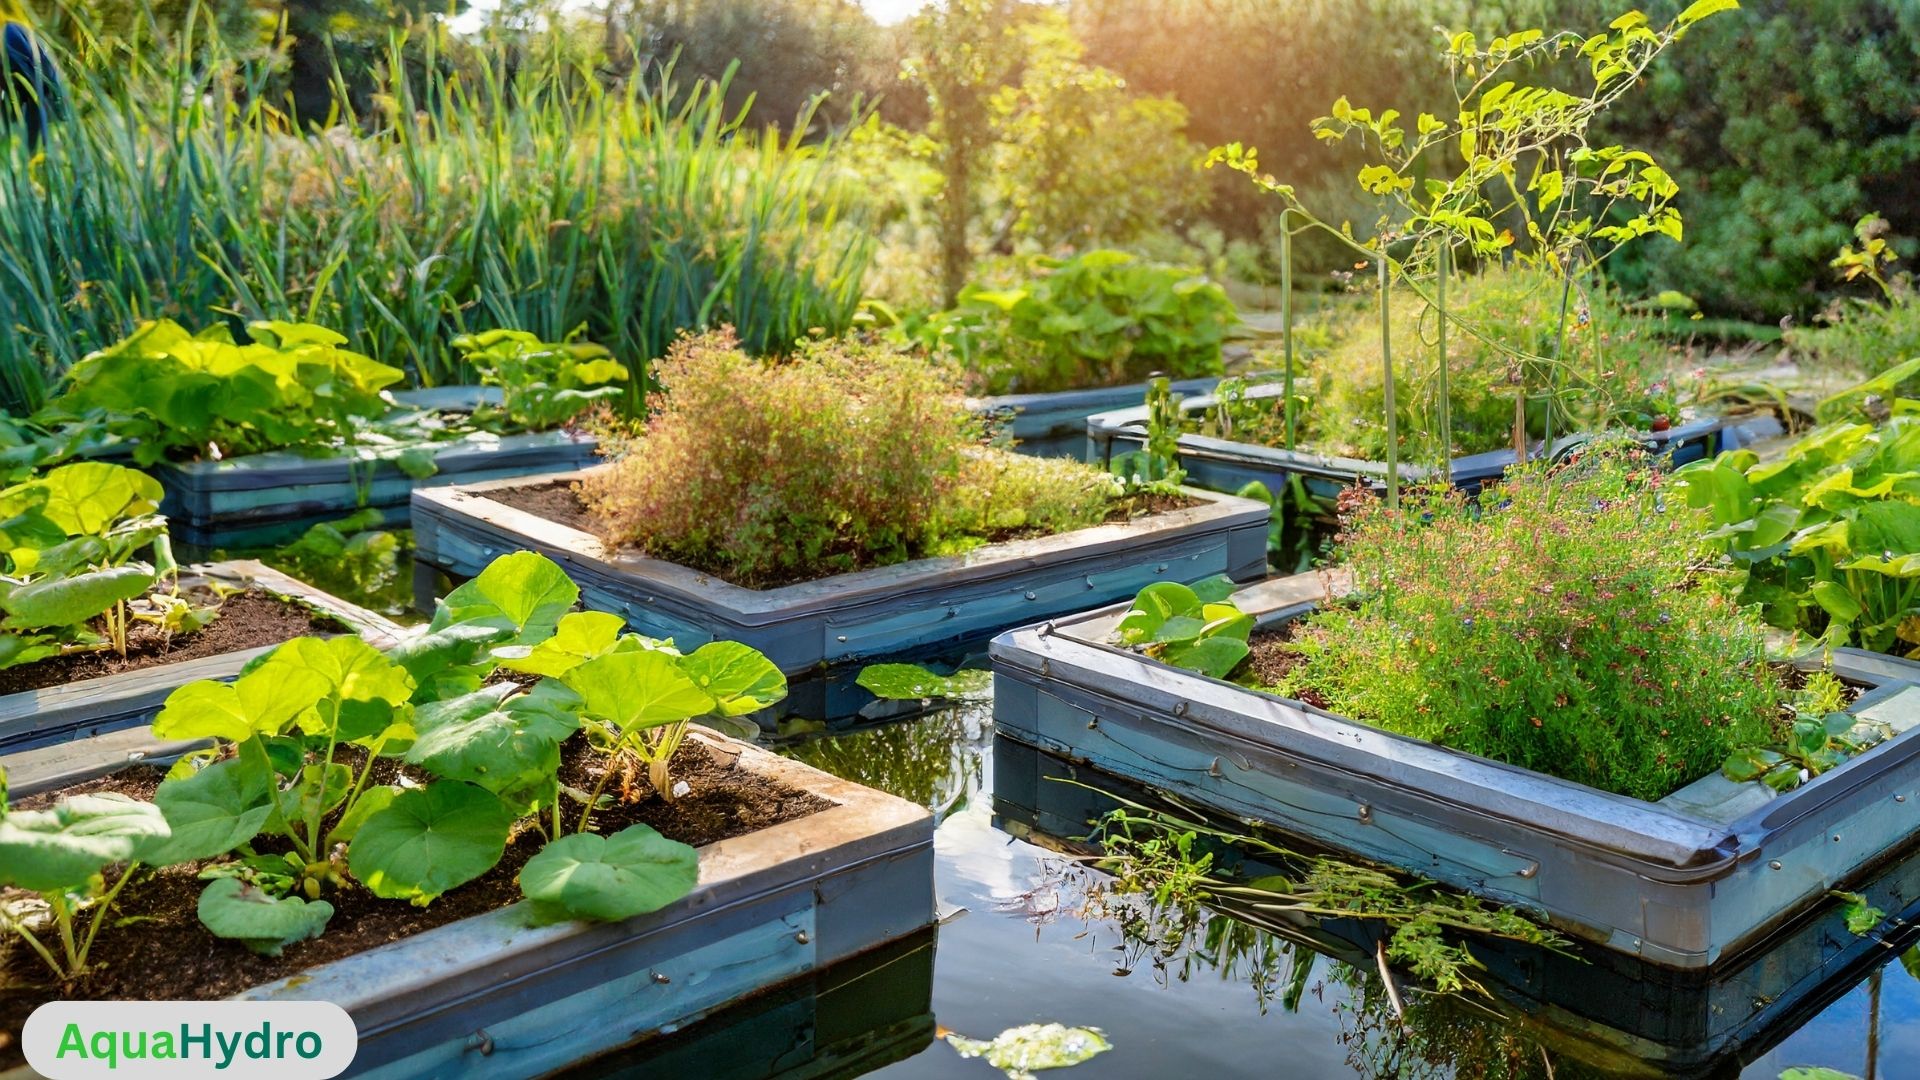 A thriving small-scale aquaponics system with lush green plants, fish in a tank, and interconnected pipes, symbolizing sustainable, organic, and resource-efficient agriculture.